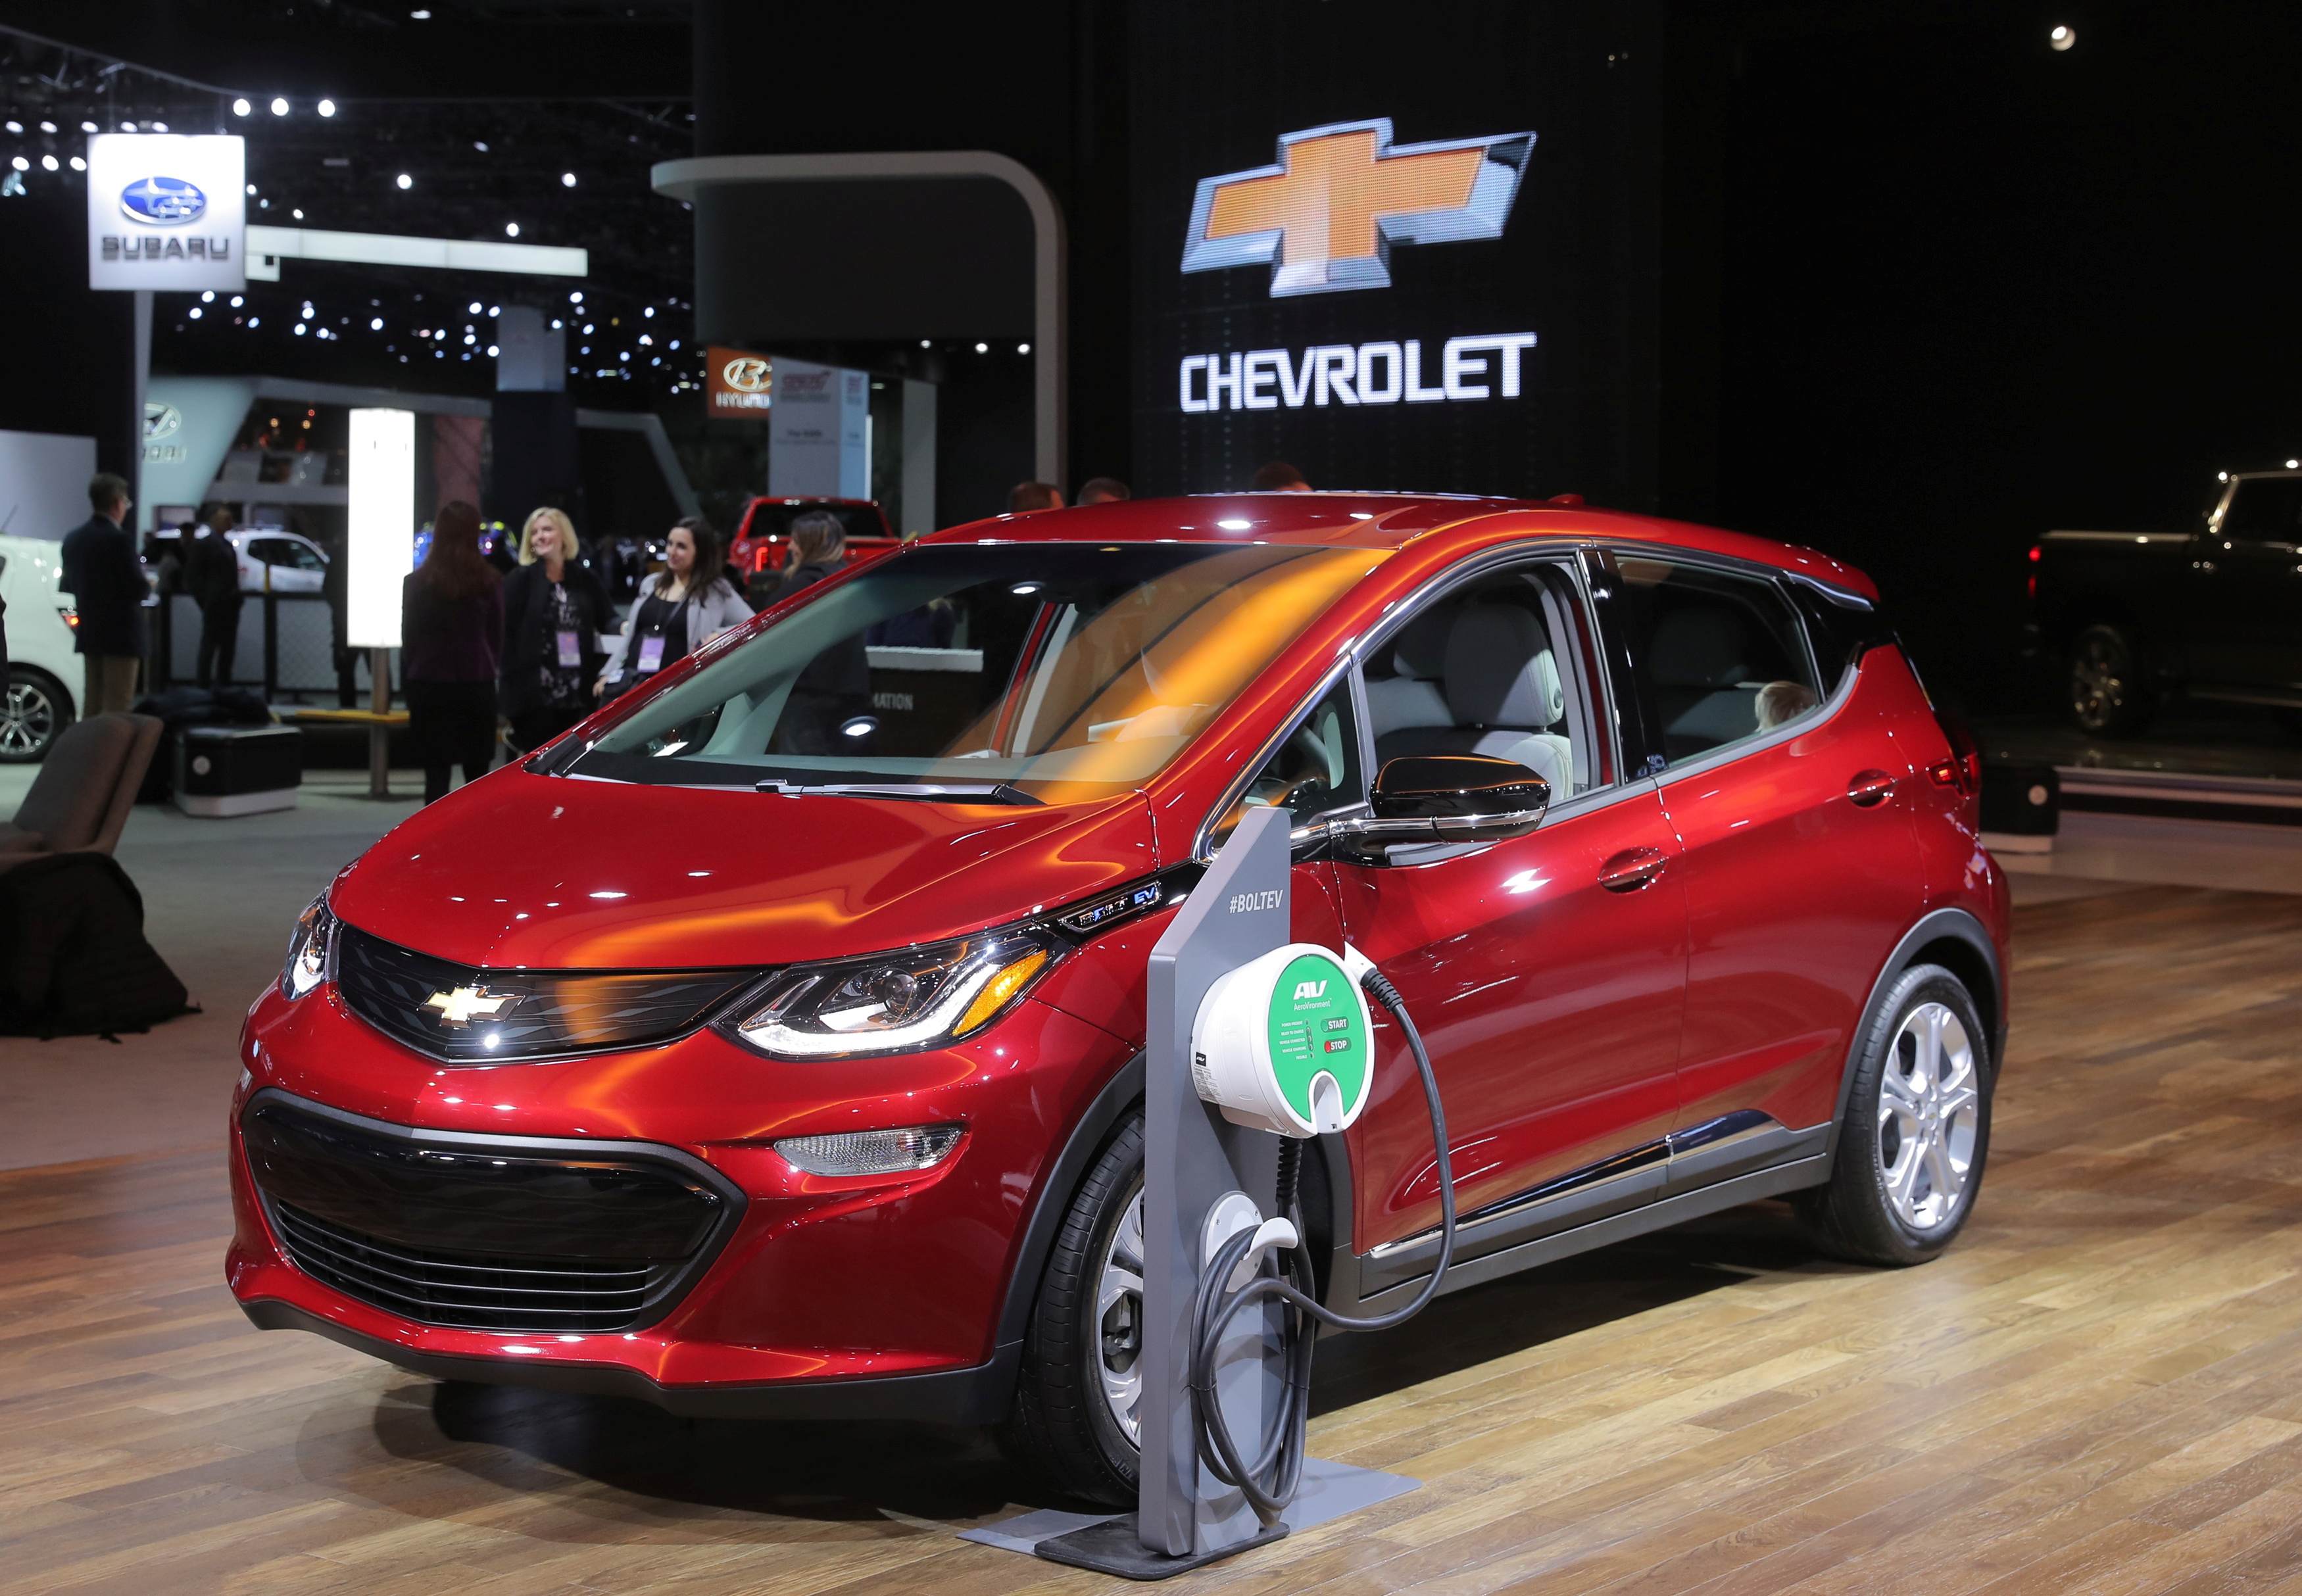 A 2019 Chevrolet Bolt plug-in electric vehicle is displayed at the North American International Auto Show in Detroit, Michigan, U.S., January 15, 2019. REUTERS/Rebecca Cook 